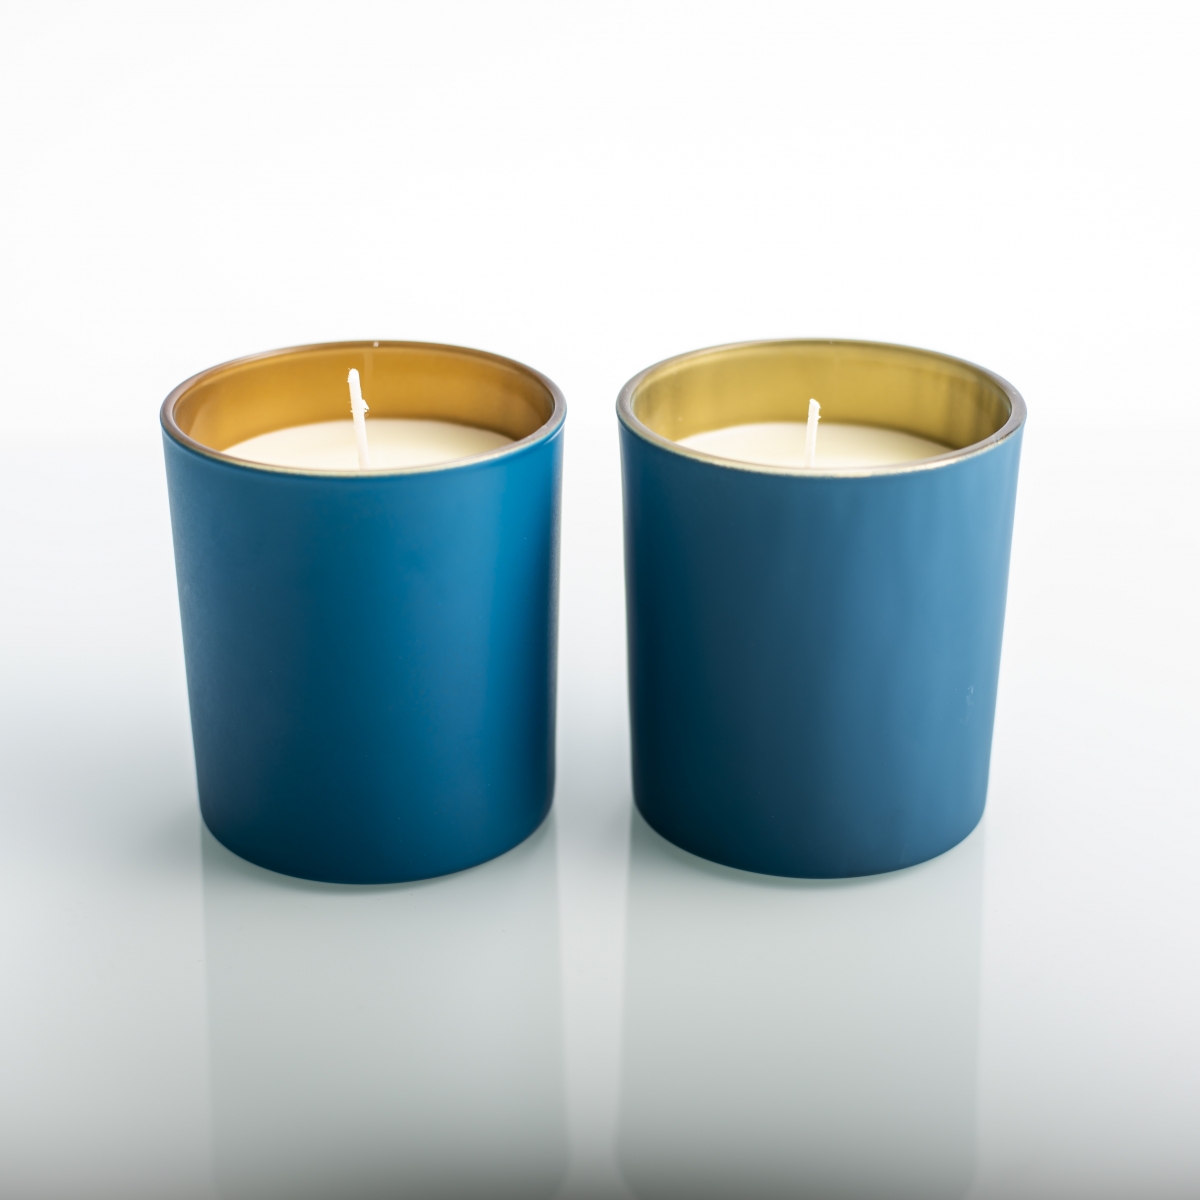 Blue Scented Candles – Best Soy Wax ,Private Label ,Custom Candles ,China Factory Price-HOWCANDLE-Candles,Scented Candles,Aromatherapy Candles,Soy Candles,Vegan Candles,Jar Candles,Pillar Candles,Candle Gift Sets,Essential Oils,Reed Diffuser,Candle Holder,